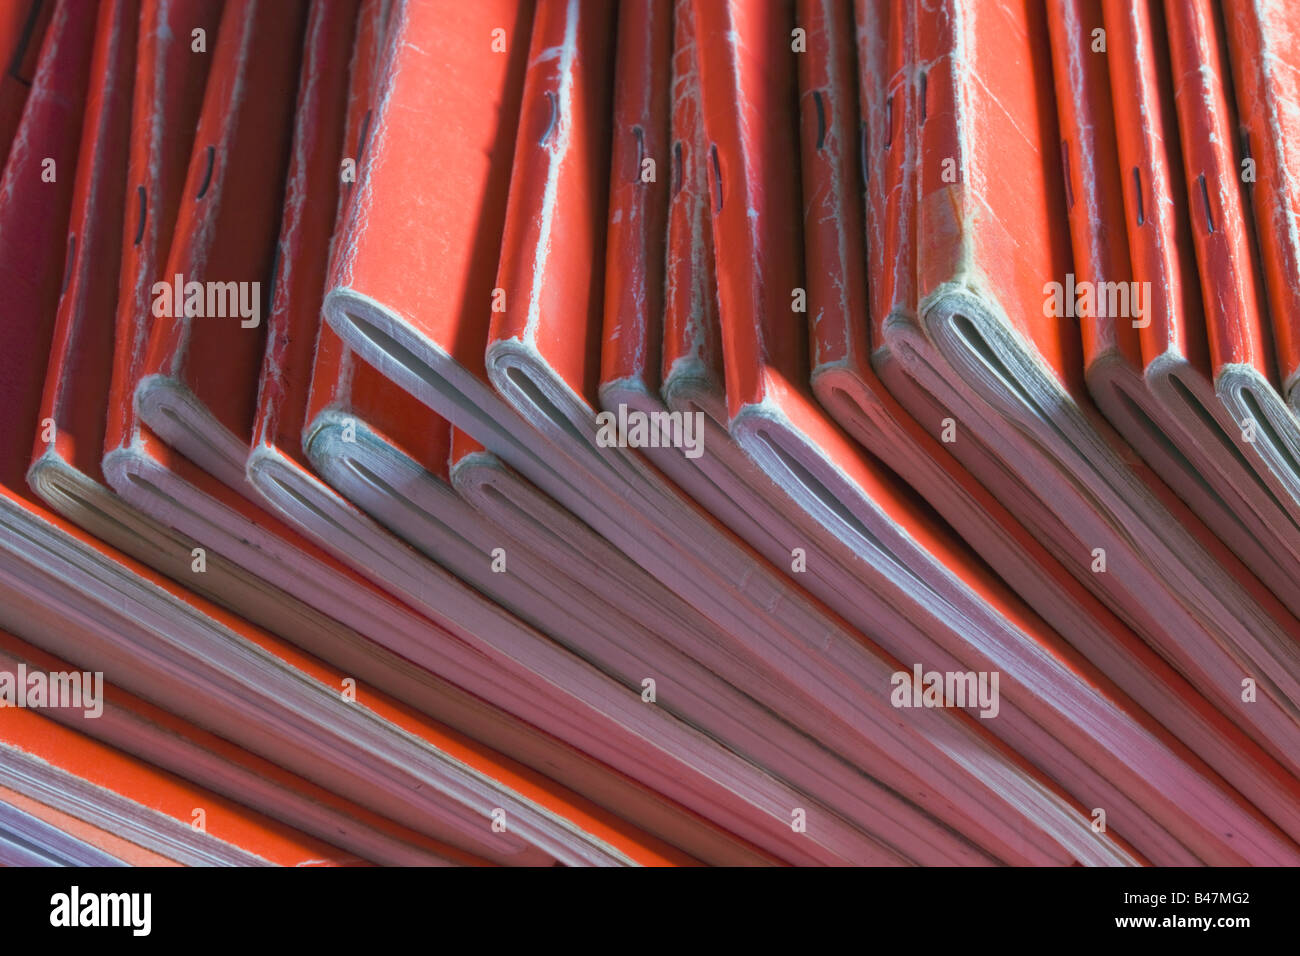 Collection of well used red notebooks Stock Photo